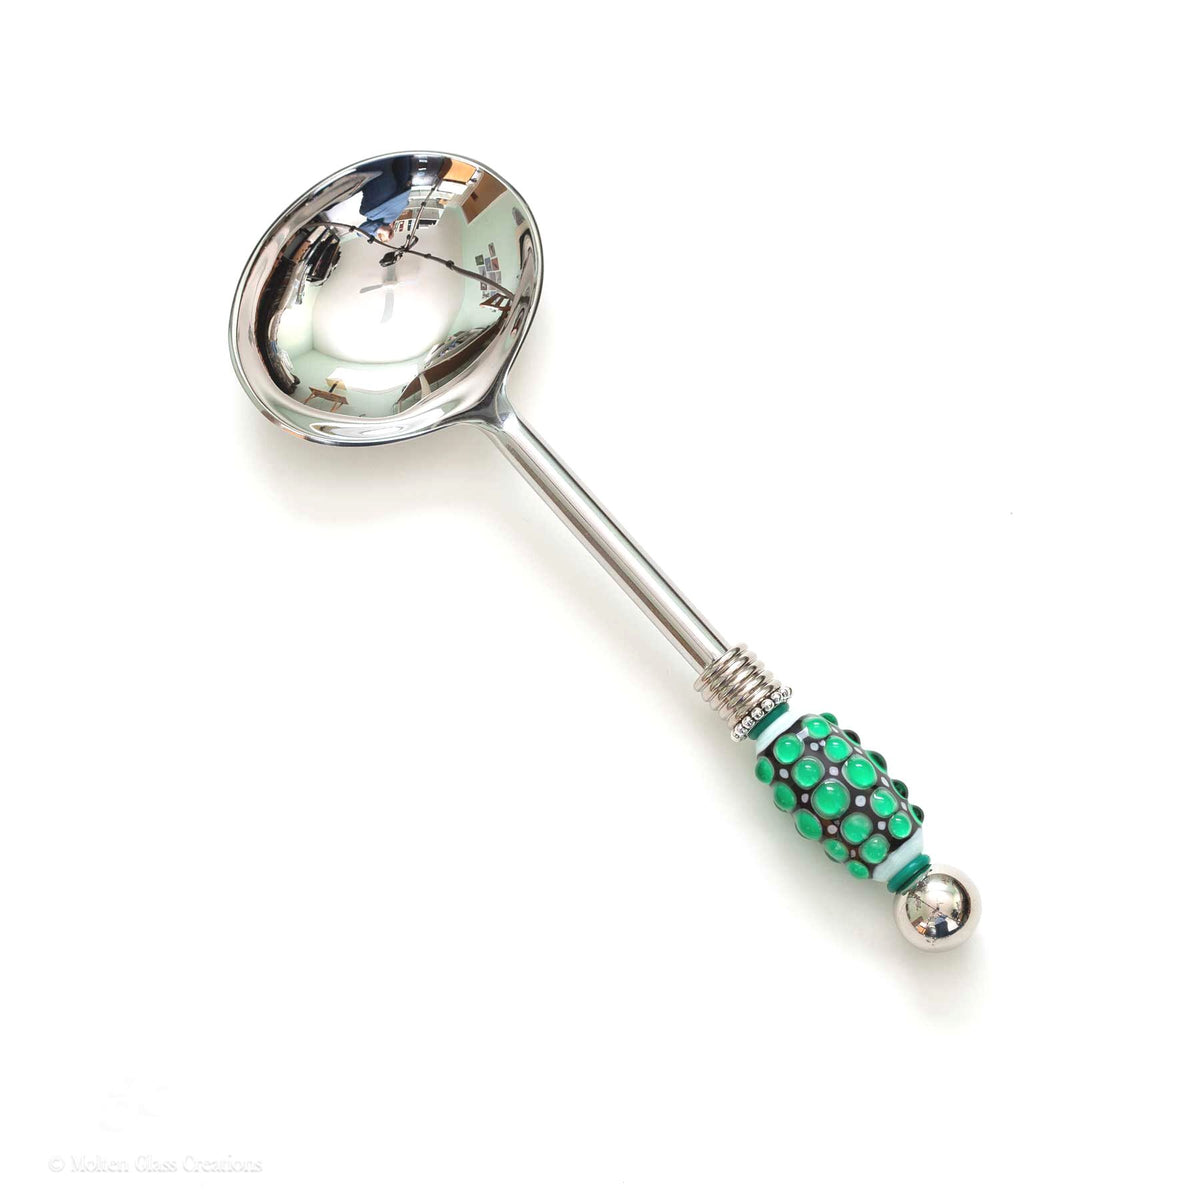 Beaded Serving Spoon - Green Dots